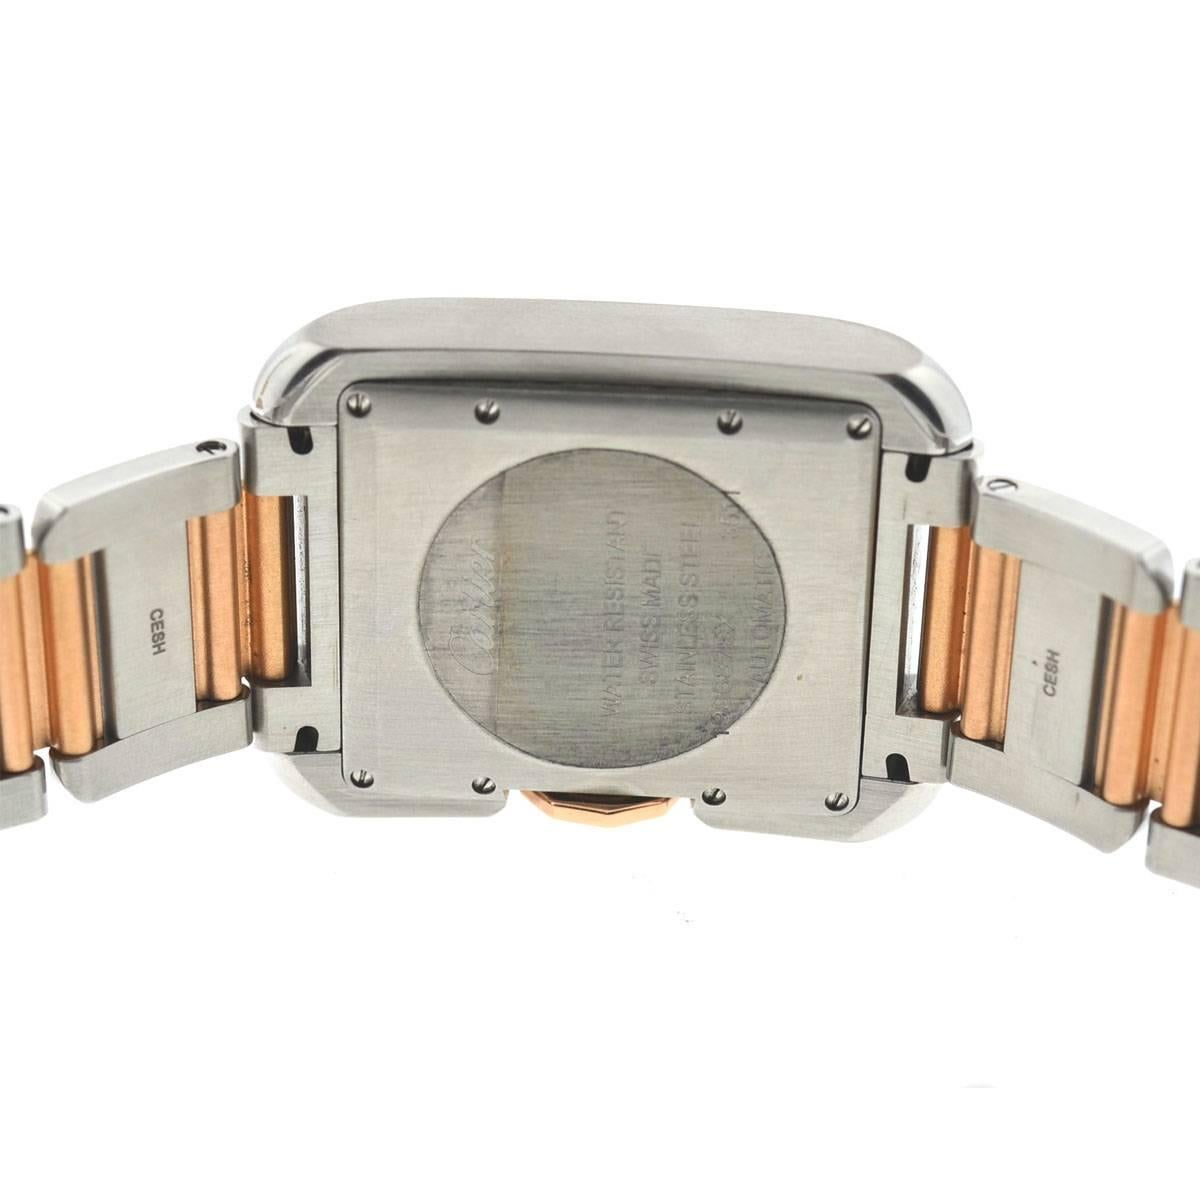 Cartier Two-Tone 3511 Anglaise Stainless Steel 18 Karat Rose Gold Watch 2